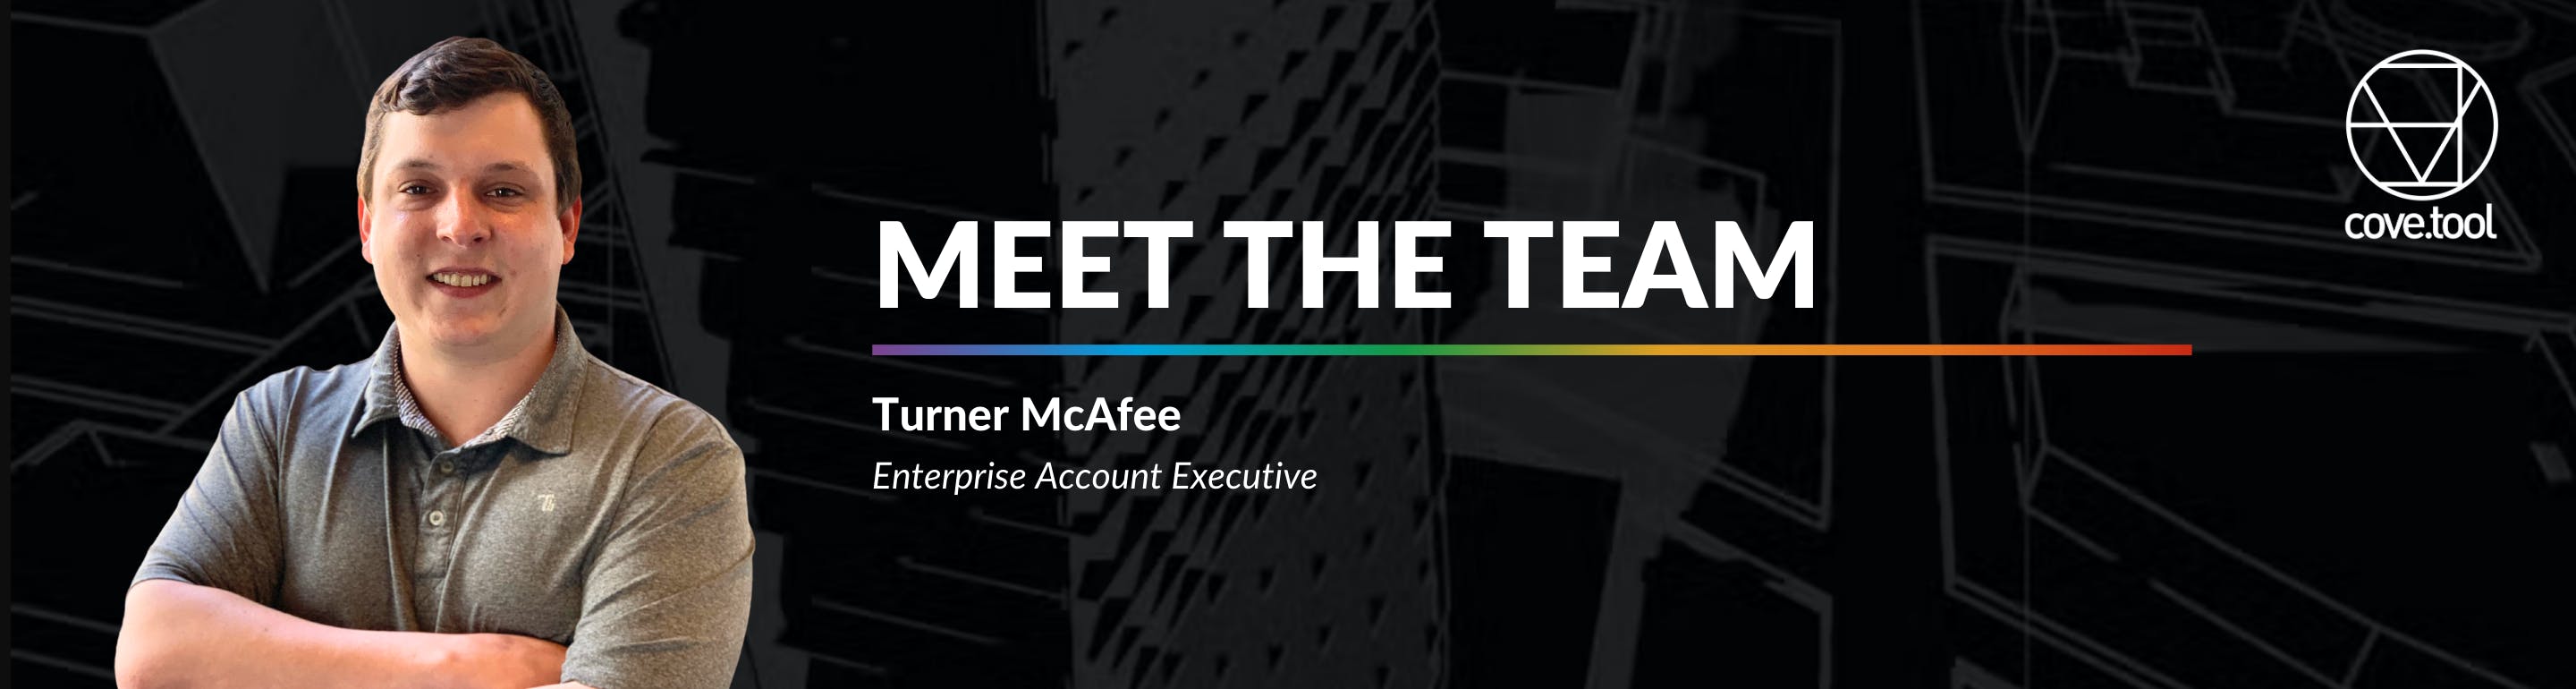 Meet one of our talented team members, Turner McAfee, cove.tool’s Enterprise Account Executive. 